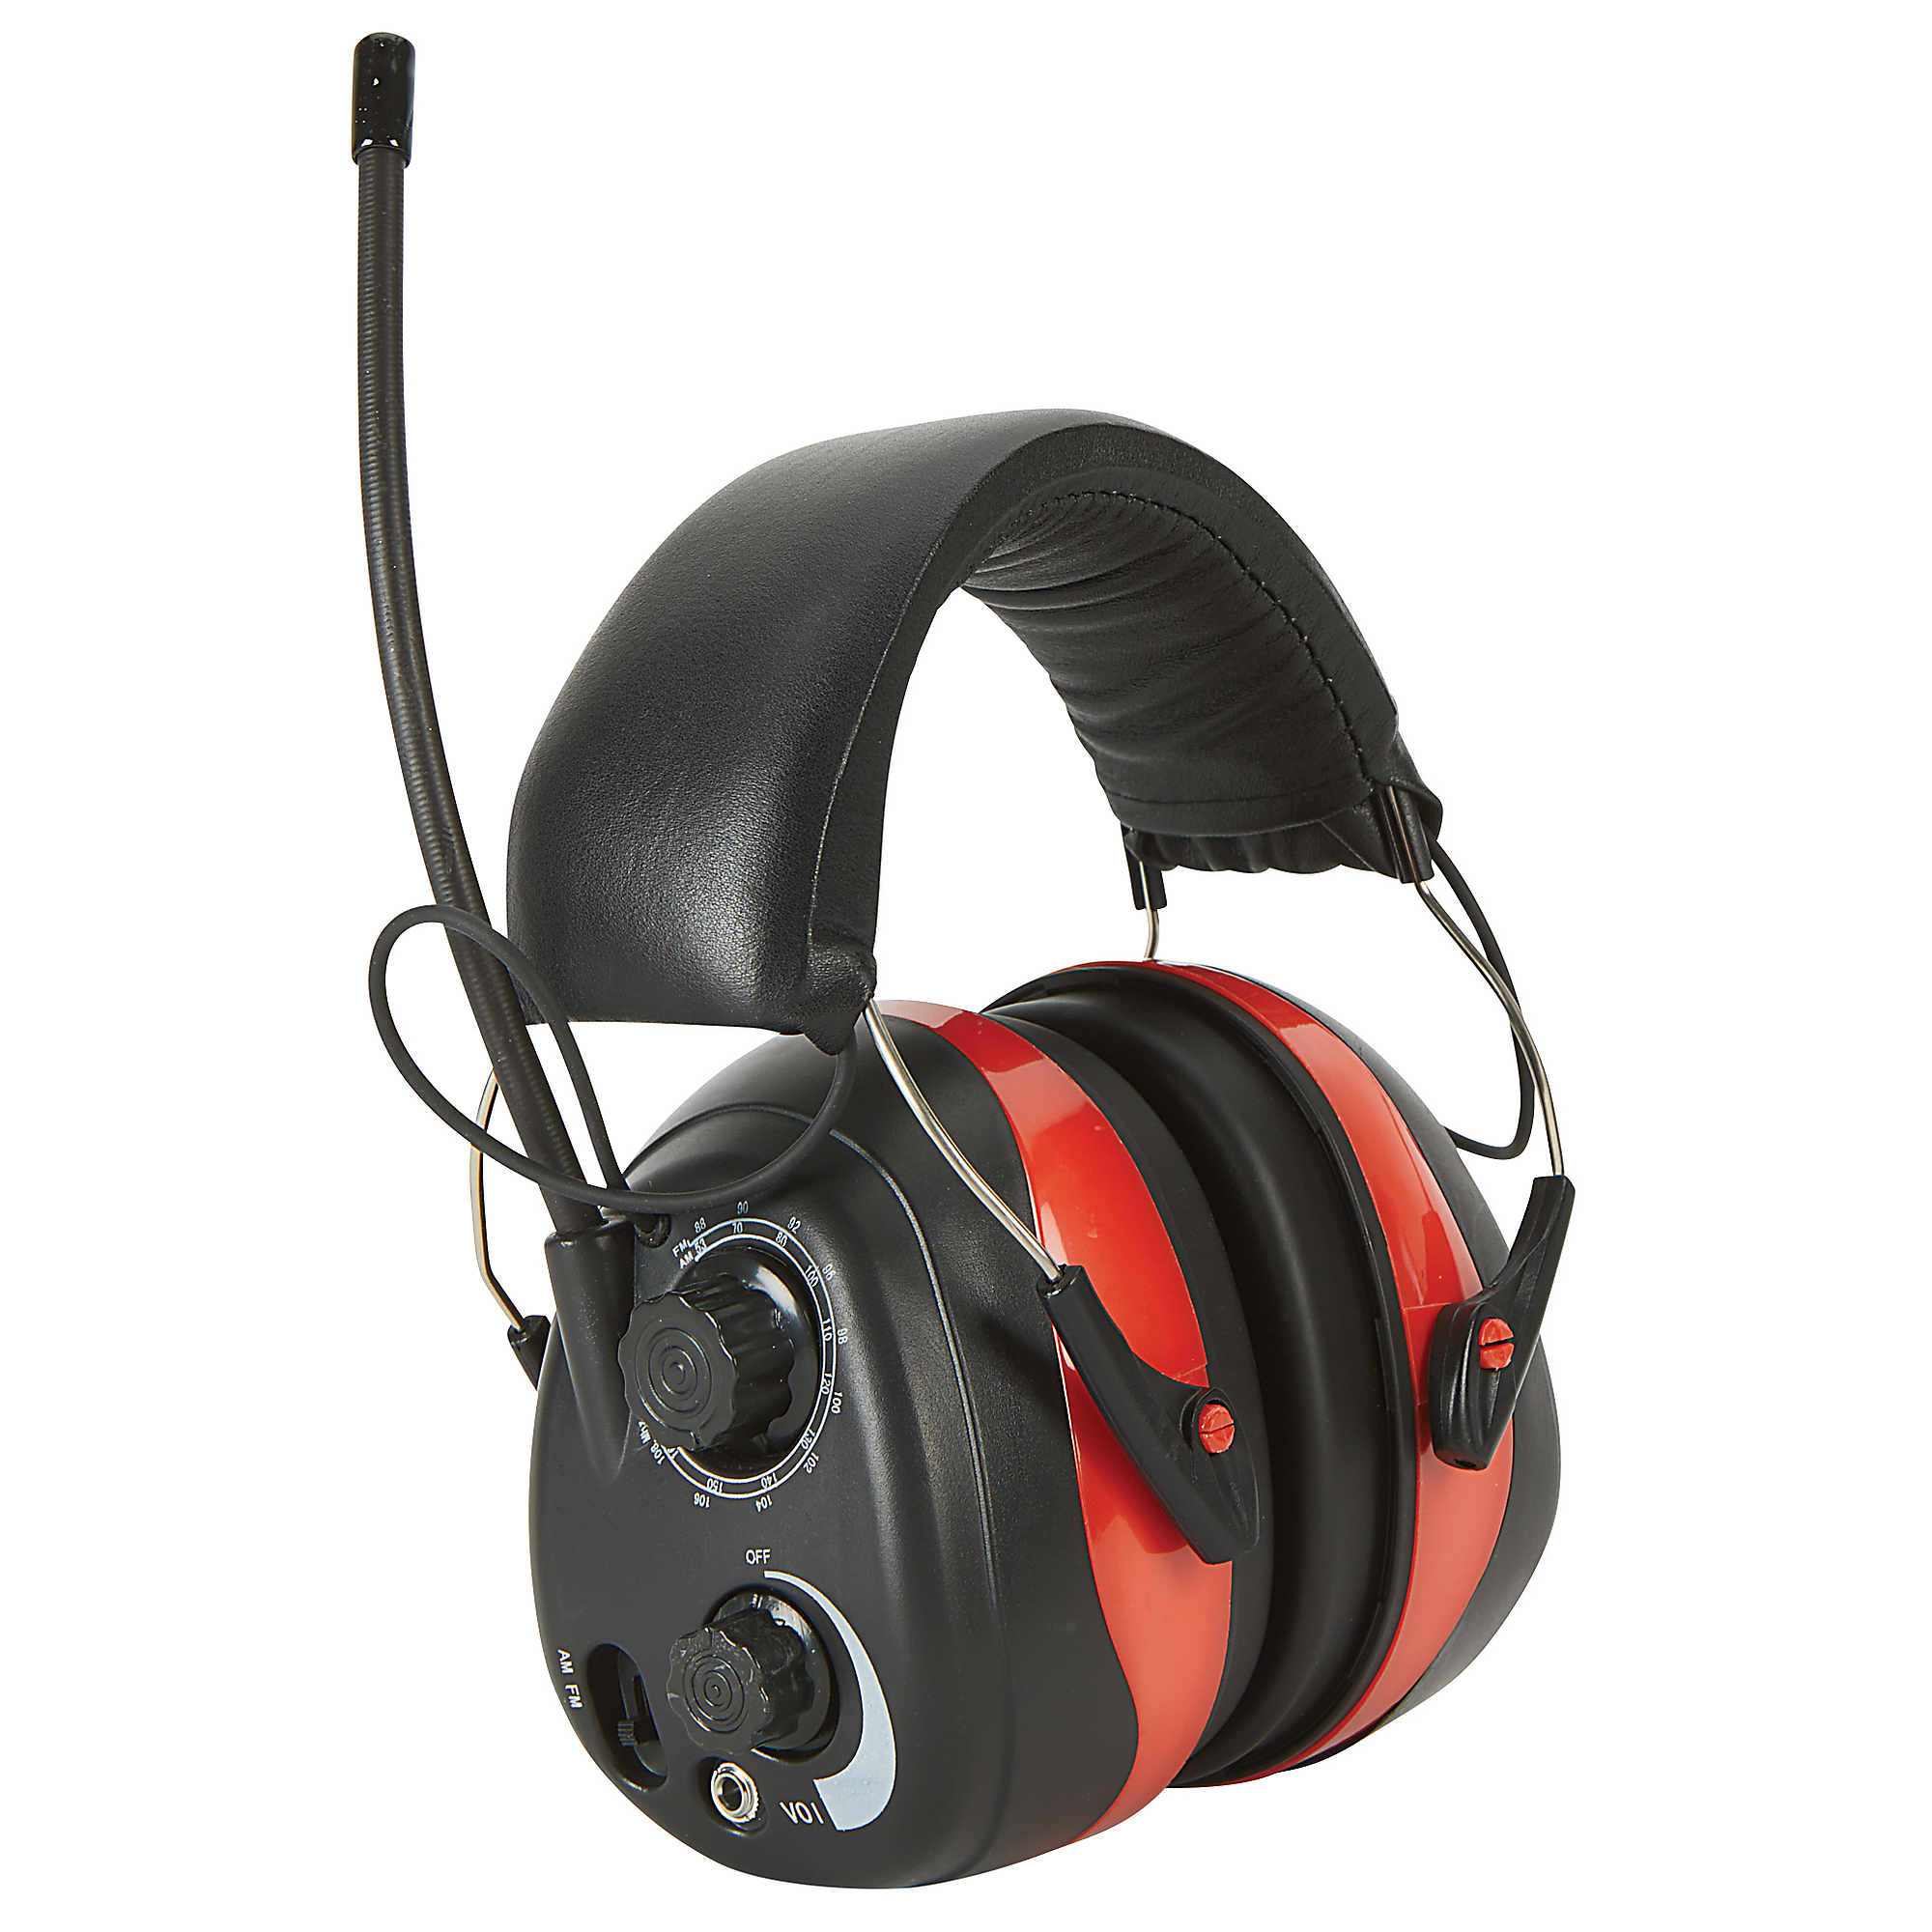 Earplugs & Earmuffs: Two is Better than One - PK Safety Supply